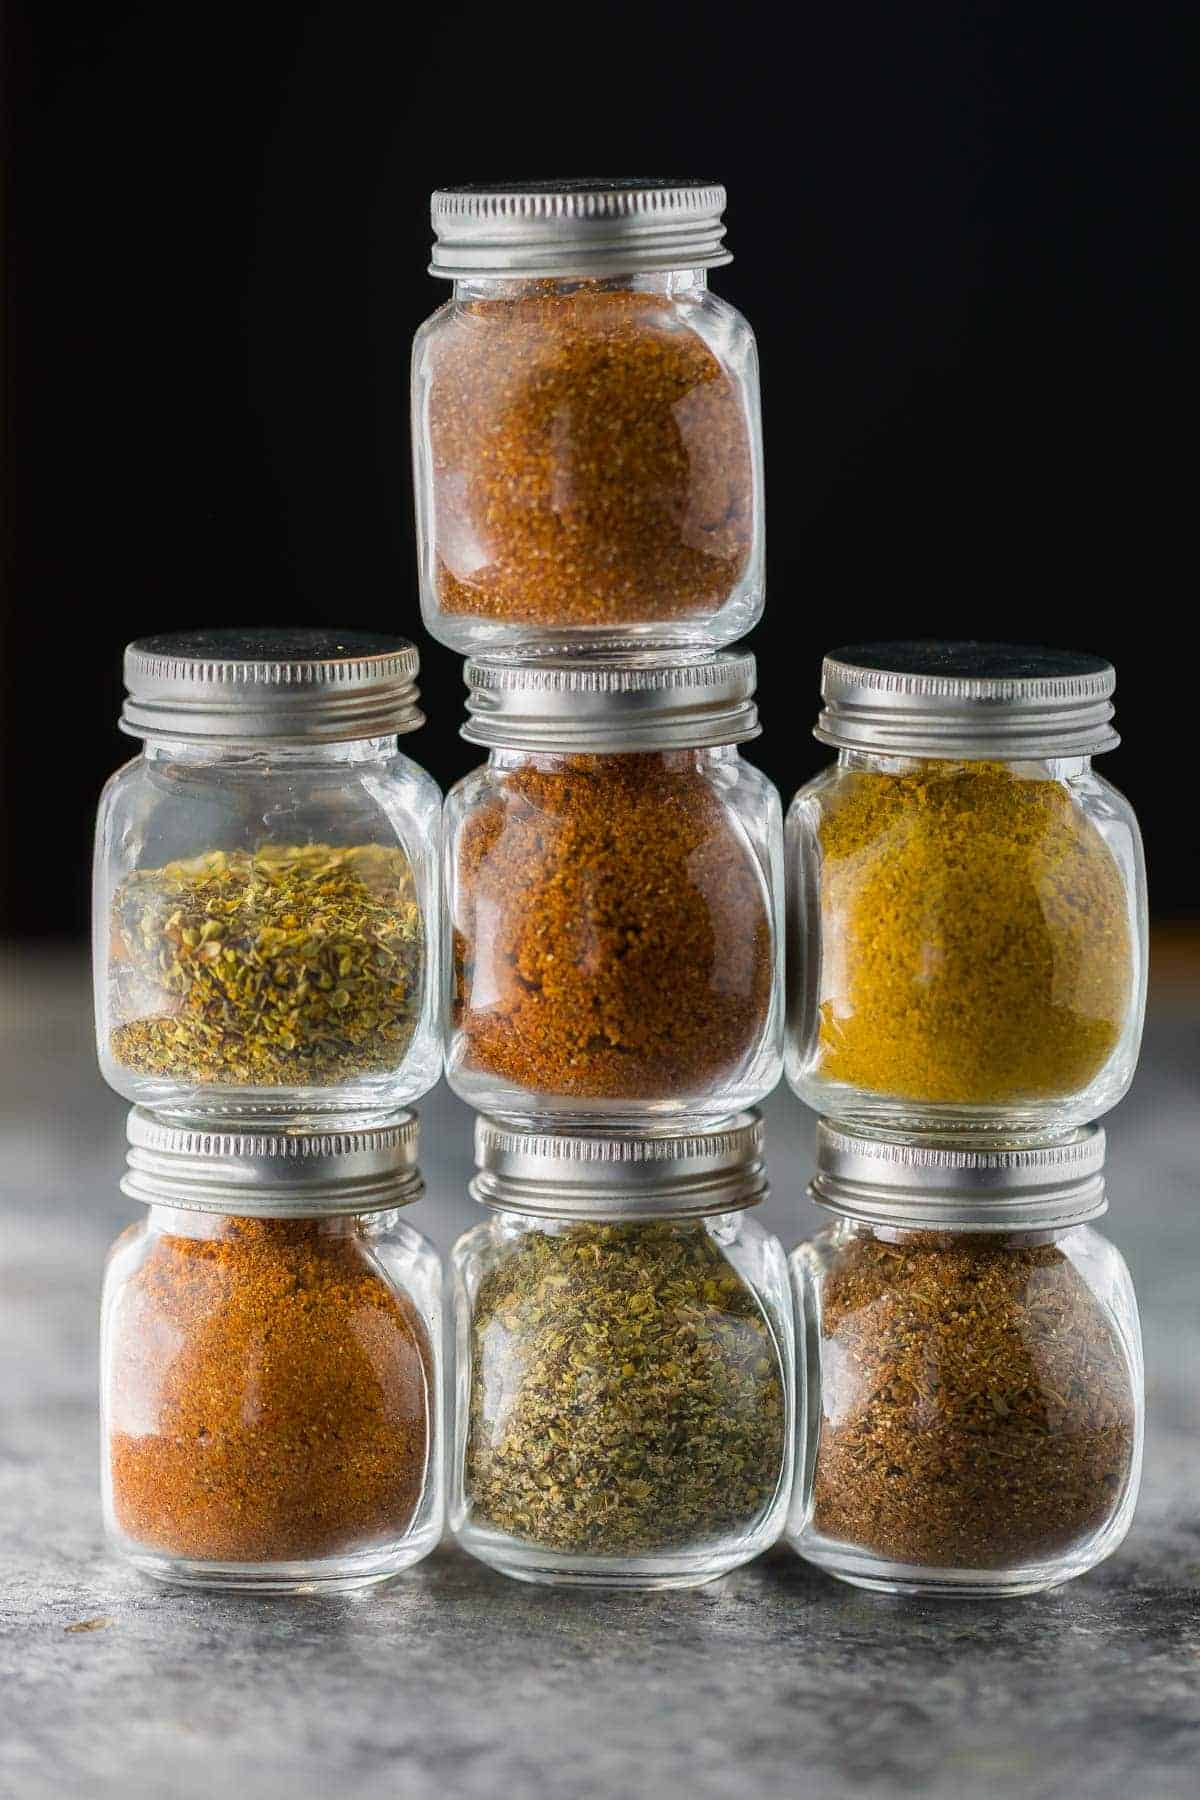 Seven glass jars in a stack filled with a variety of dry rub recipes